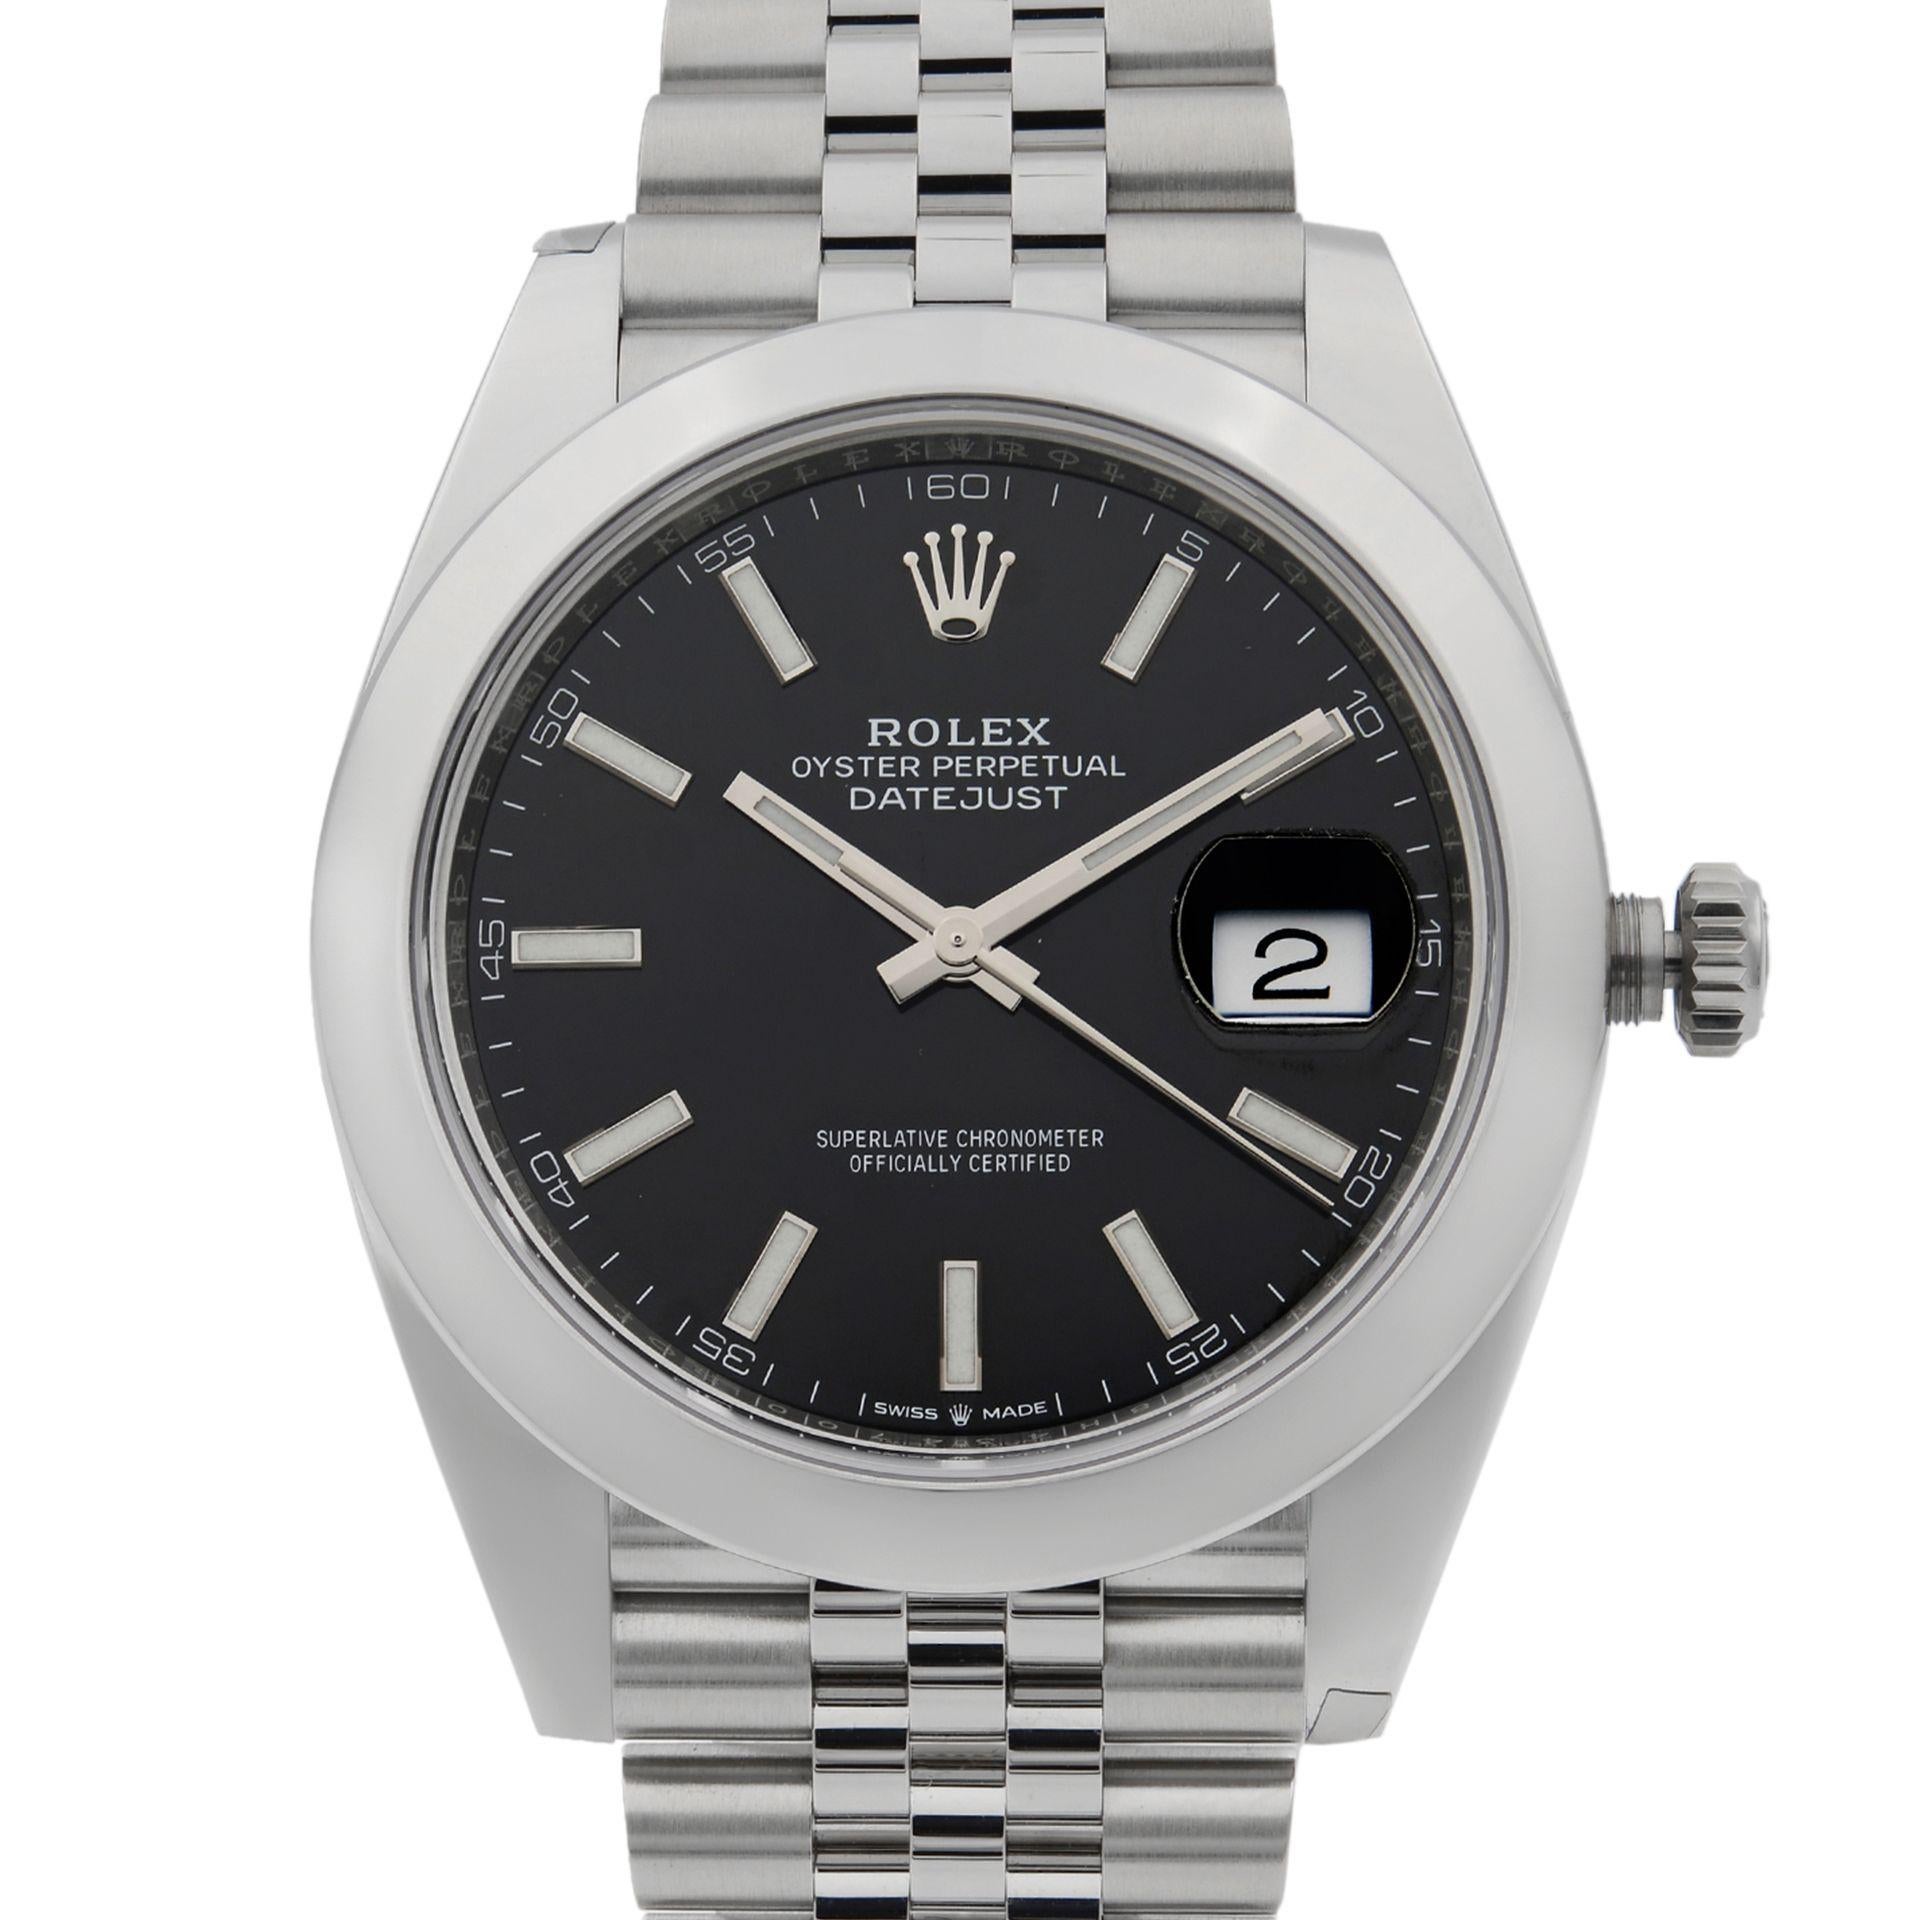 This brand new Rolex Datejust 41 126300 bkij is a beautiful men's timepiece that is powered by mechanical (automatic) movement which is cased in a stainless steel case. It has a round shape face, date indicator dial and has hand sticks style